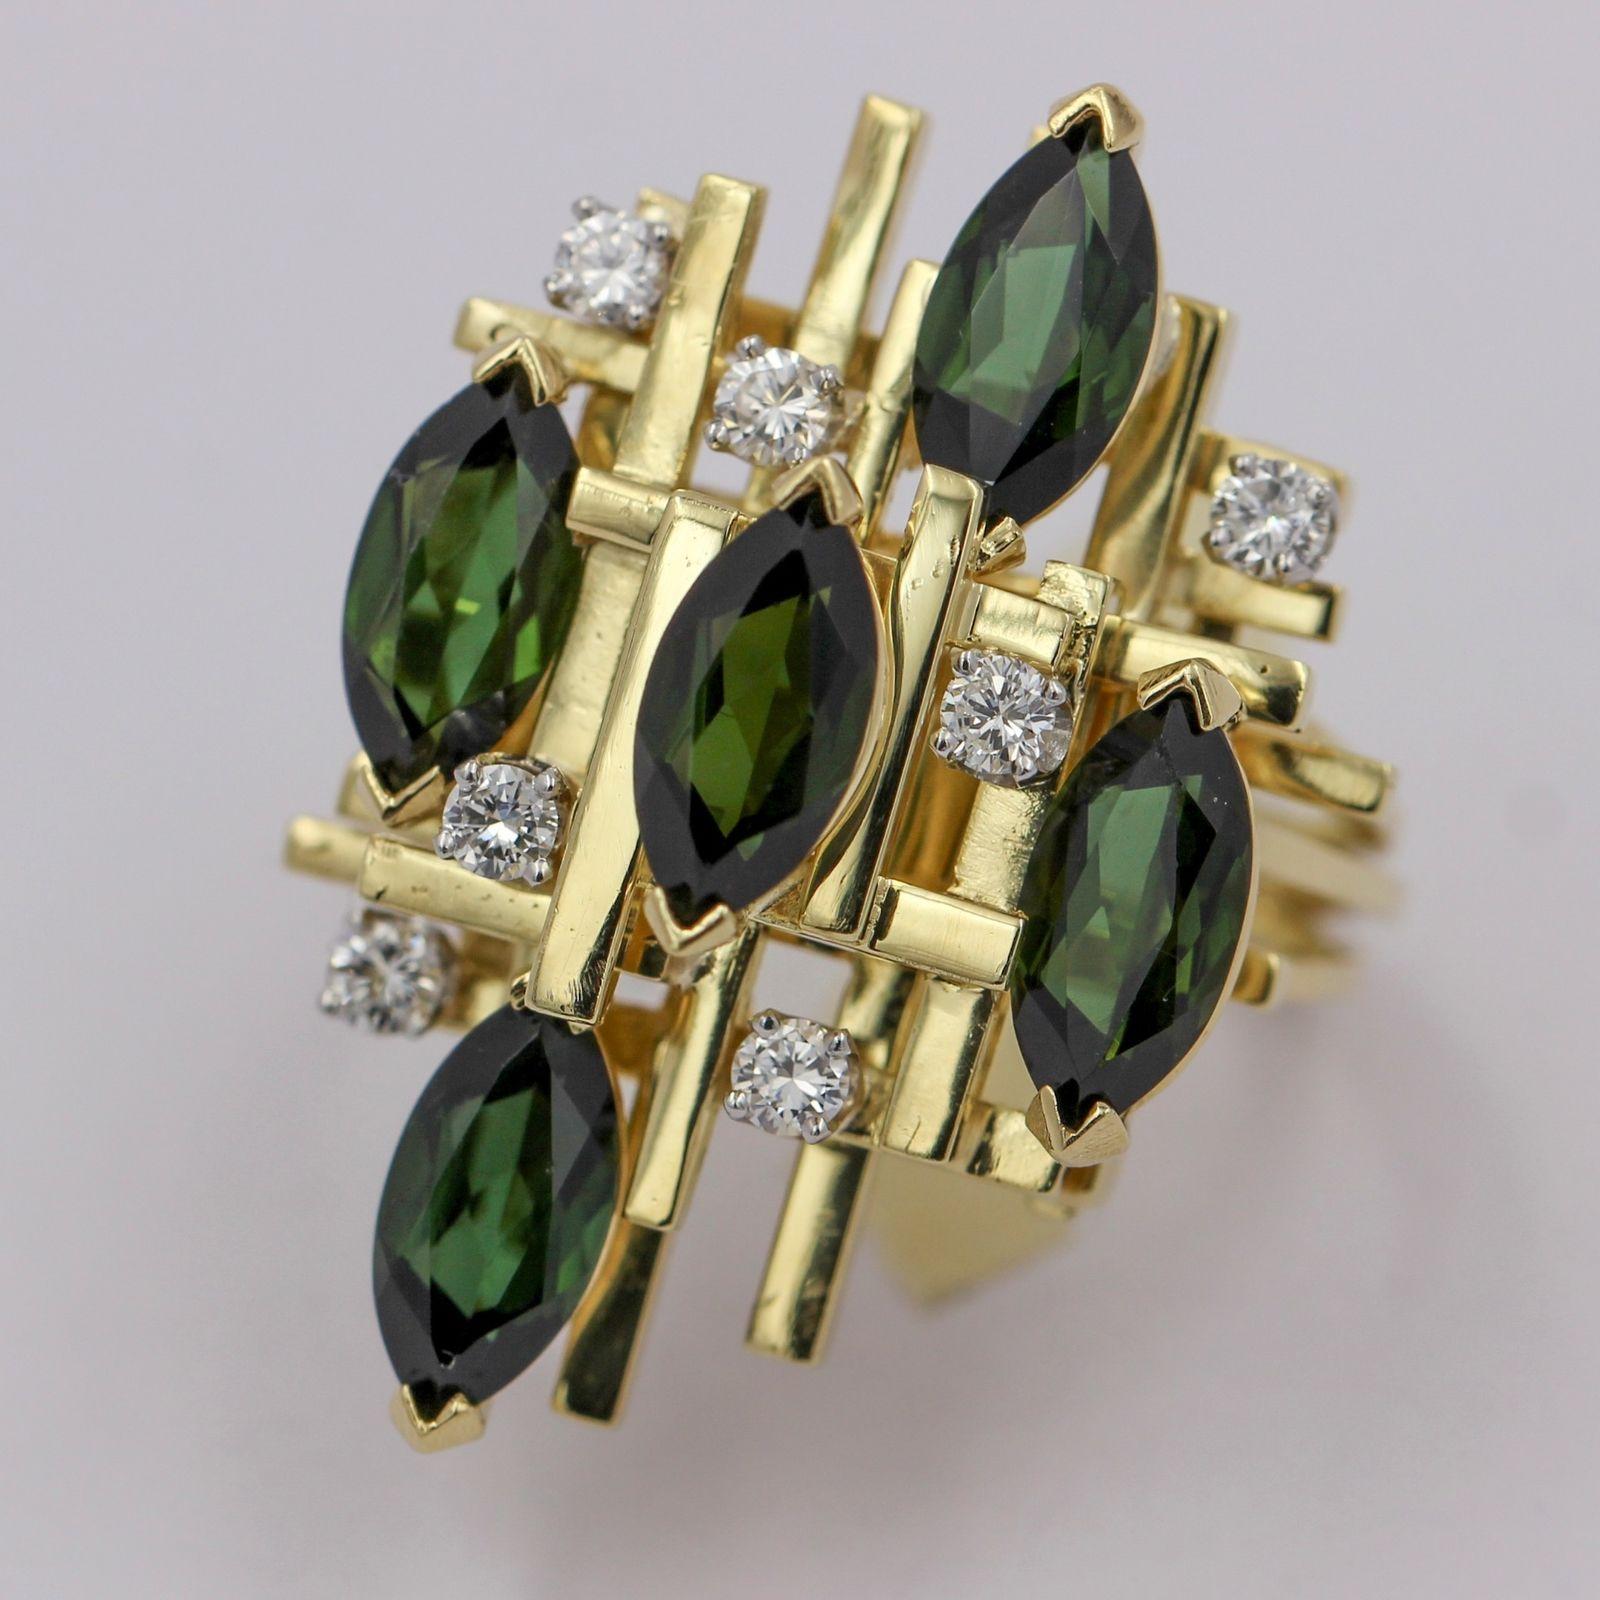 Henry Dunay green tourmaline and diamond ring crafted in 18 karat gold. Size 10. Circa 1970s. The ring is prong set with 5 marquise-cut chrome tourmalines and 7 round-cut natural diamonds. Estimated total carat weight of diamonds, .50ct.